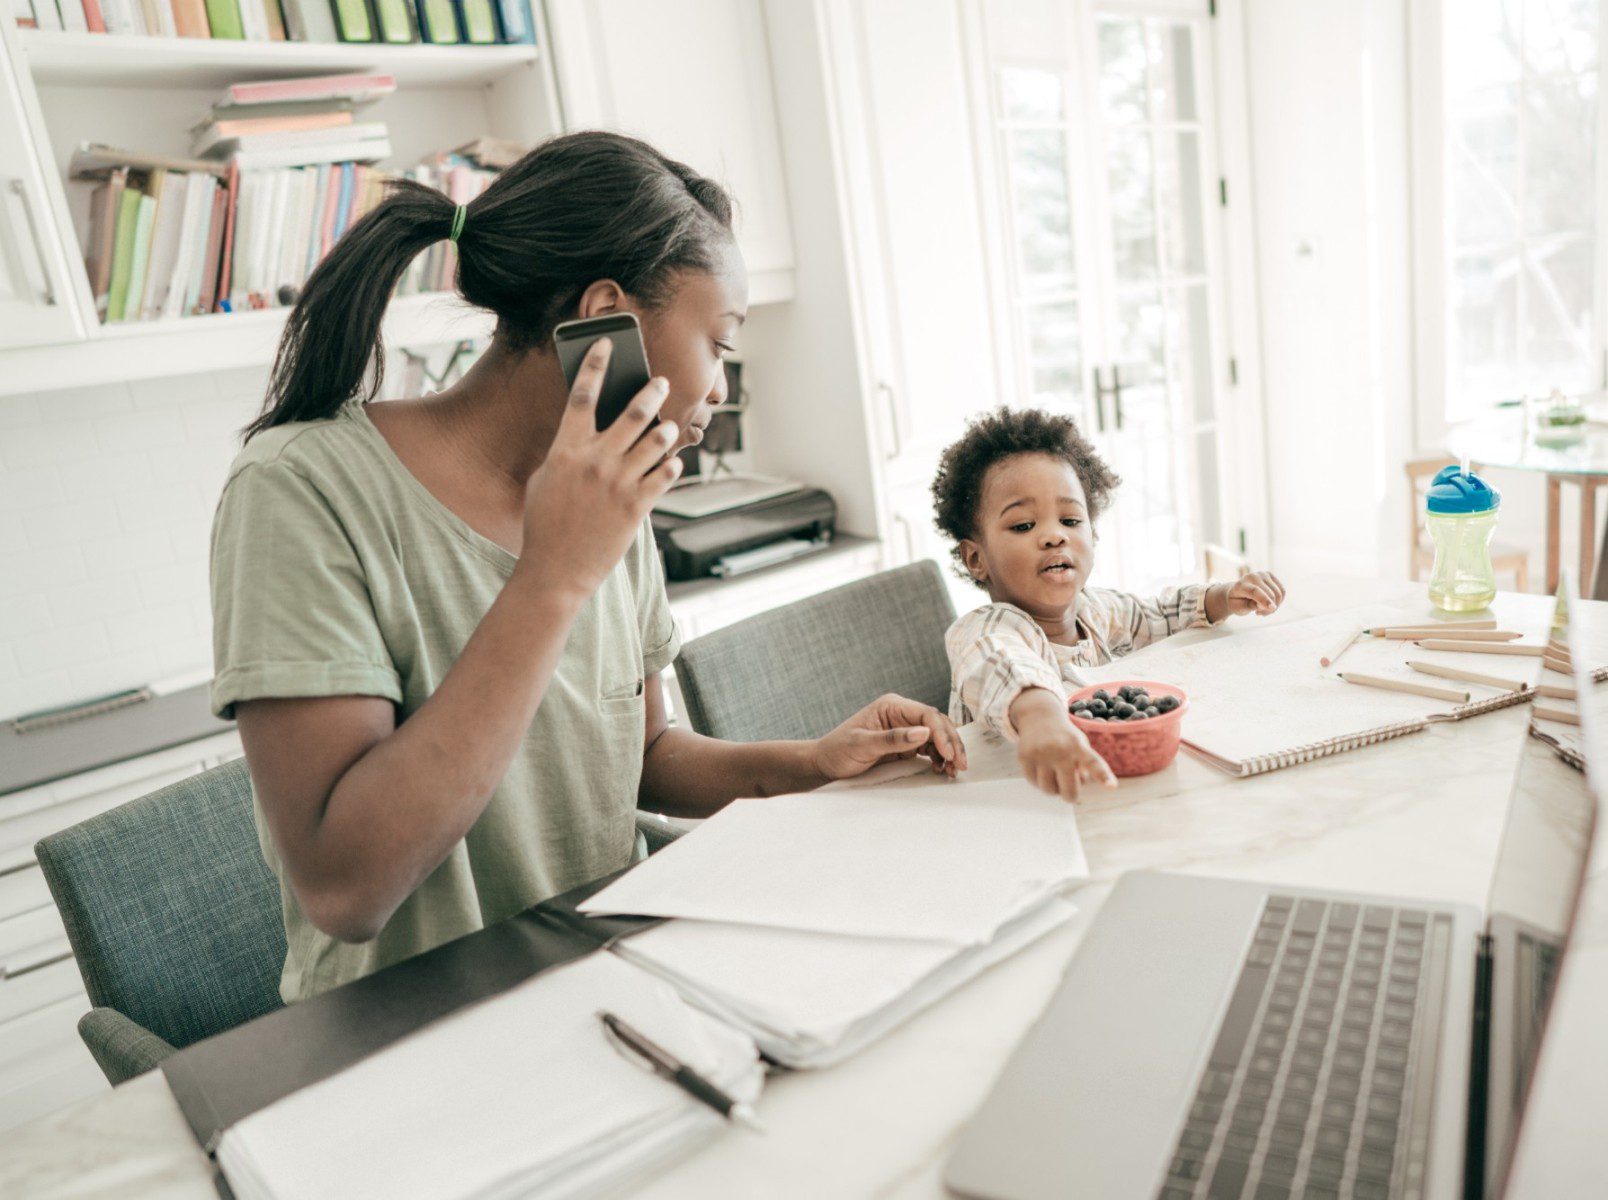 How Can HR Help Support and Retain Working Mothers?